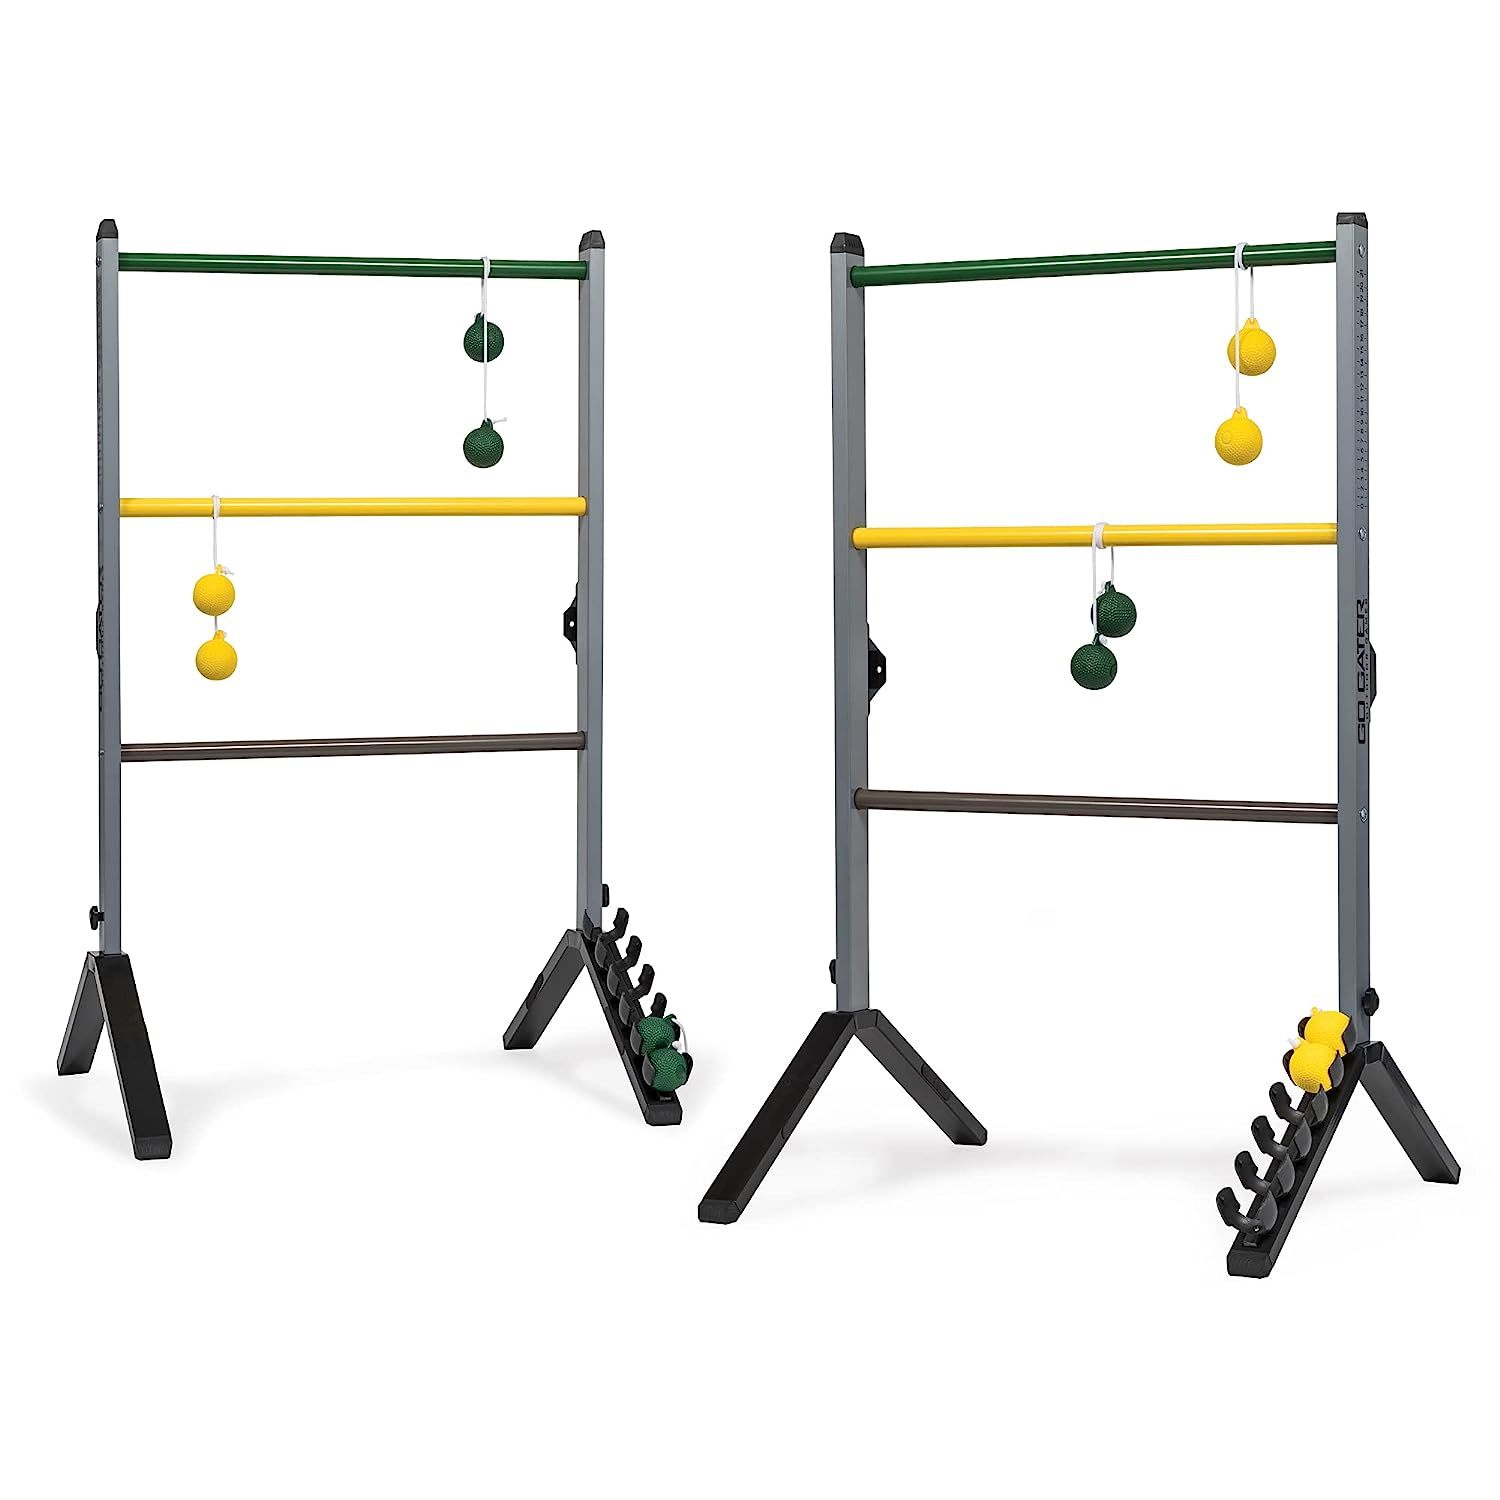 Primary image for Go! Gater Premium Steel Ladderball Set, Features Sturdy Steel Material, Built-In